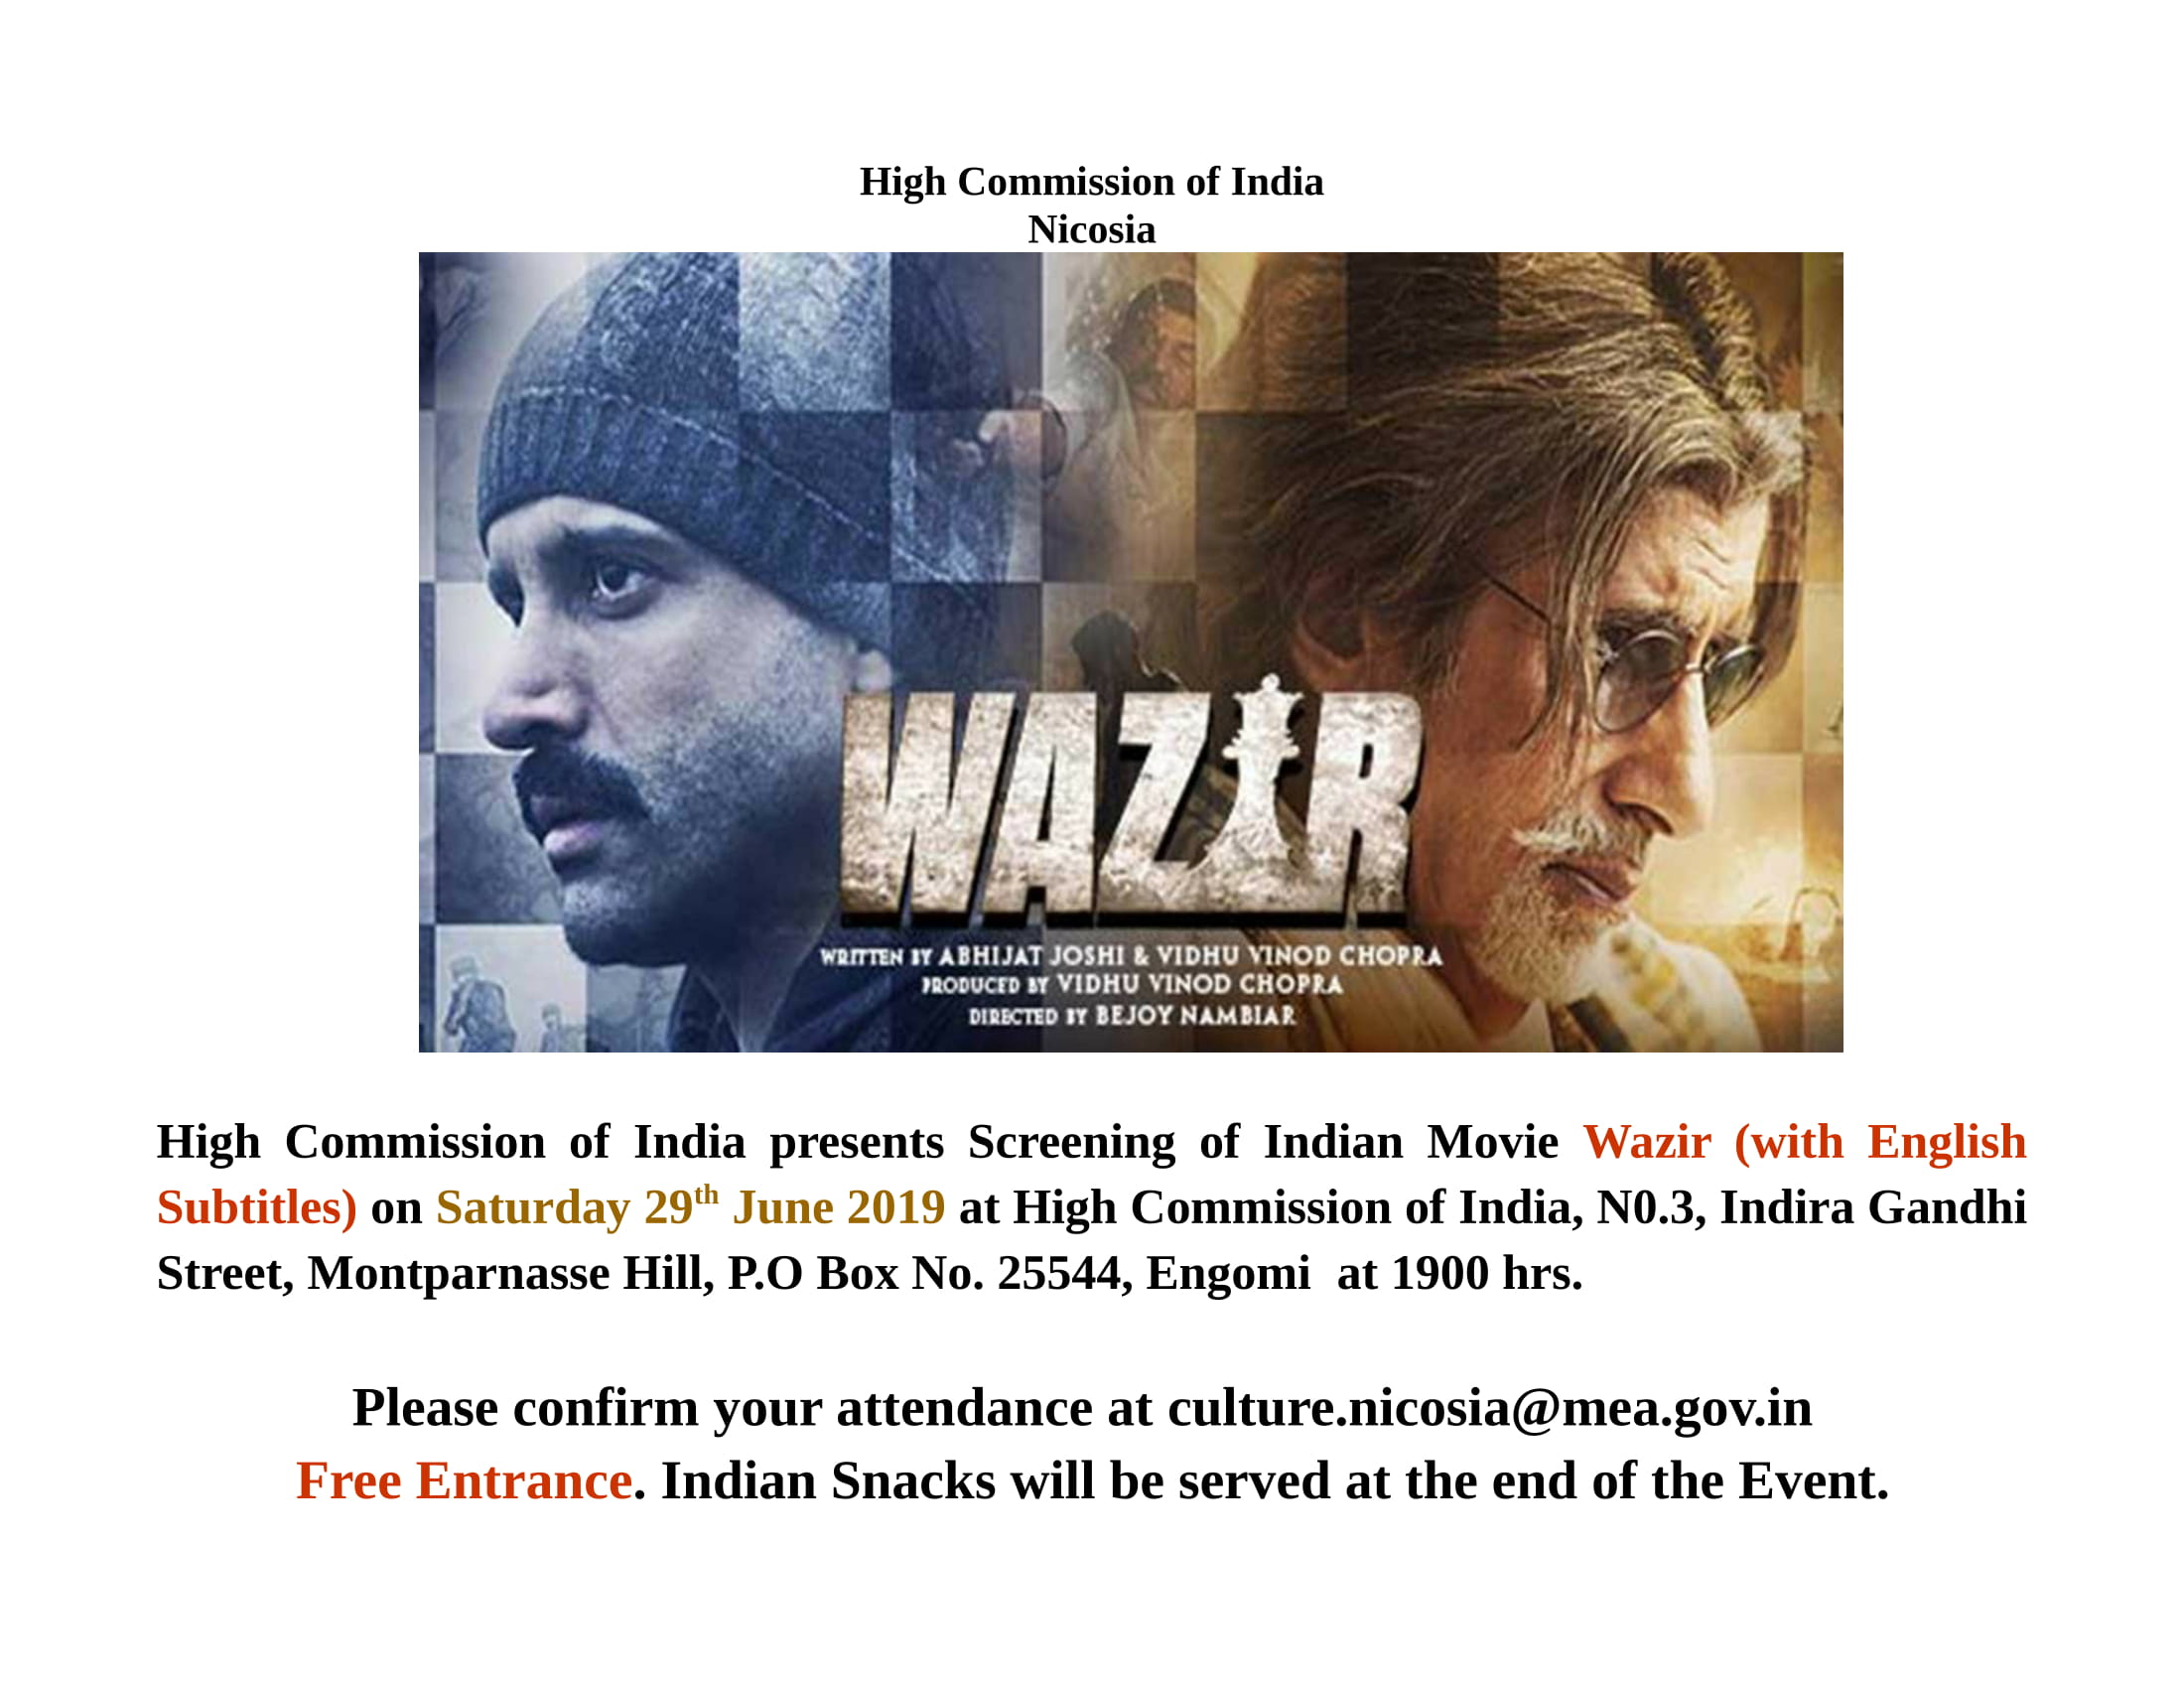 Sitemap Screening Of Indian Movie Wazir On 29th June 2019 June (2019) dvdwap, 1cd (eng). high commission of india